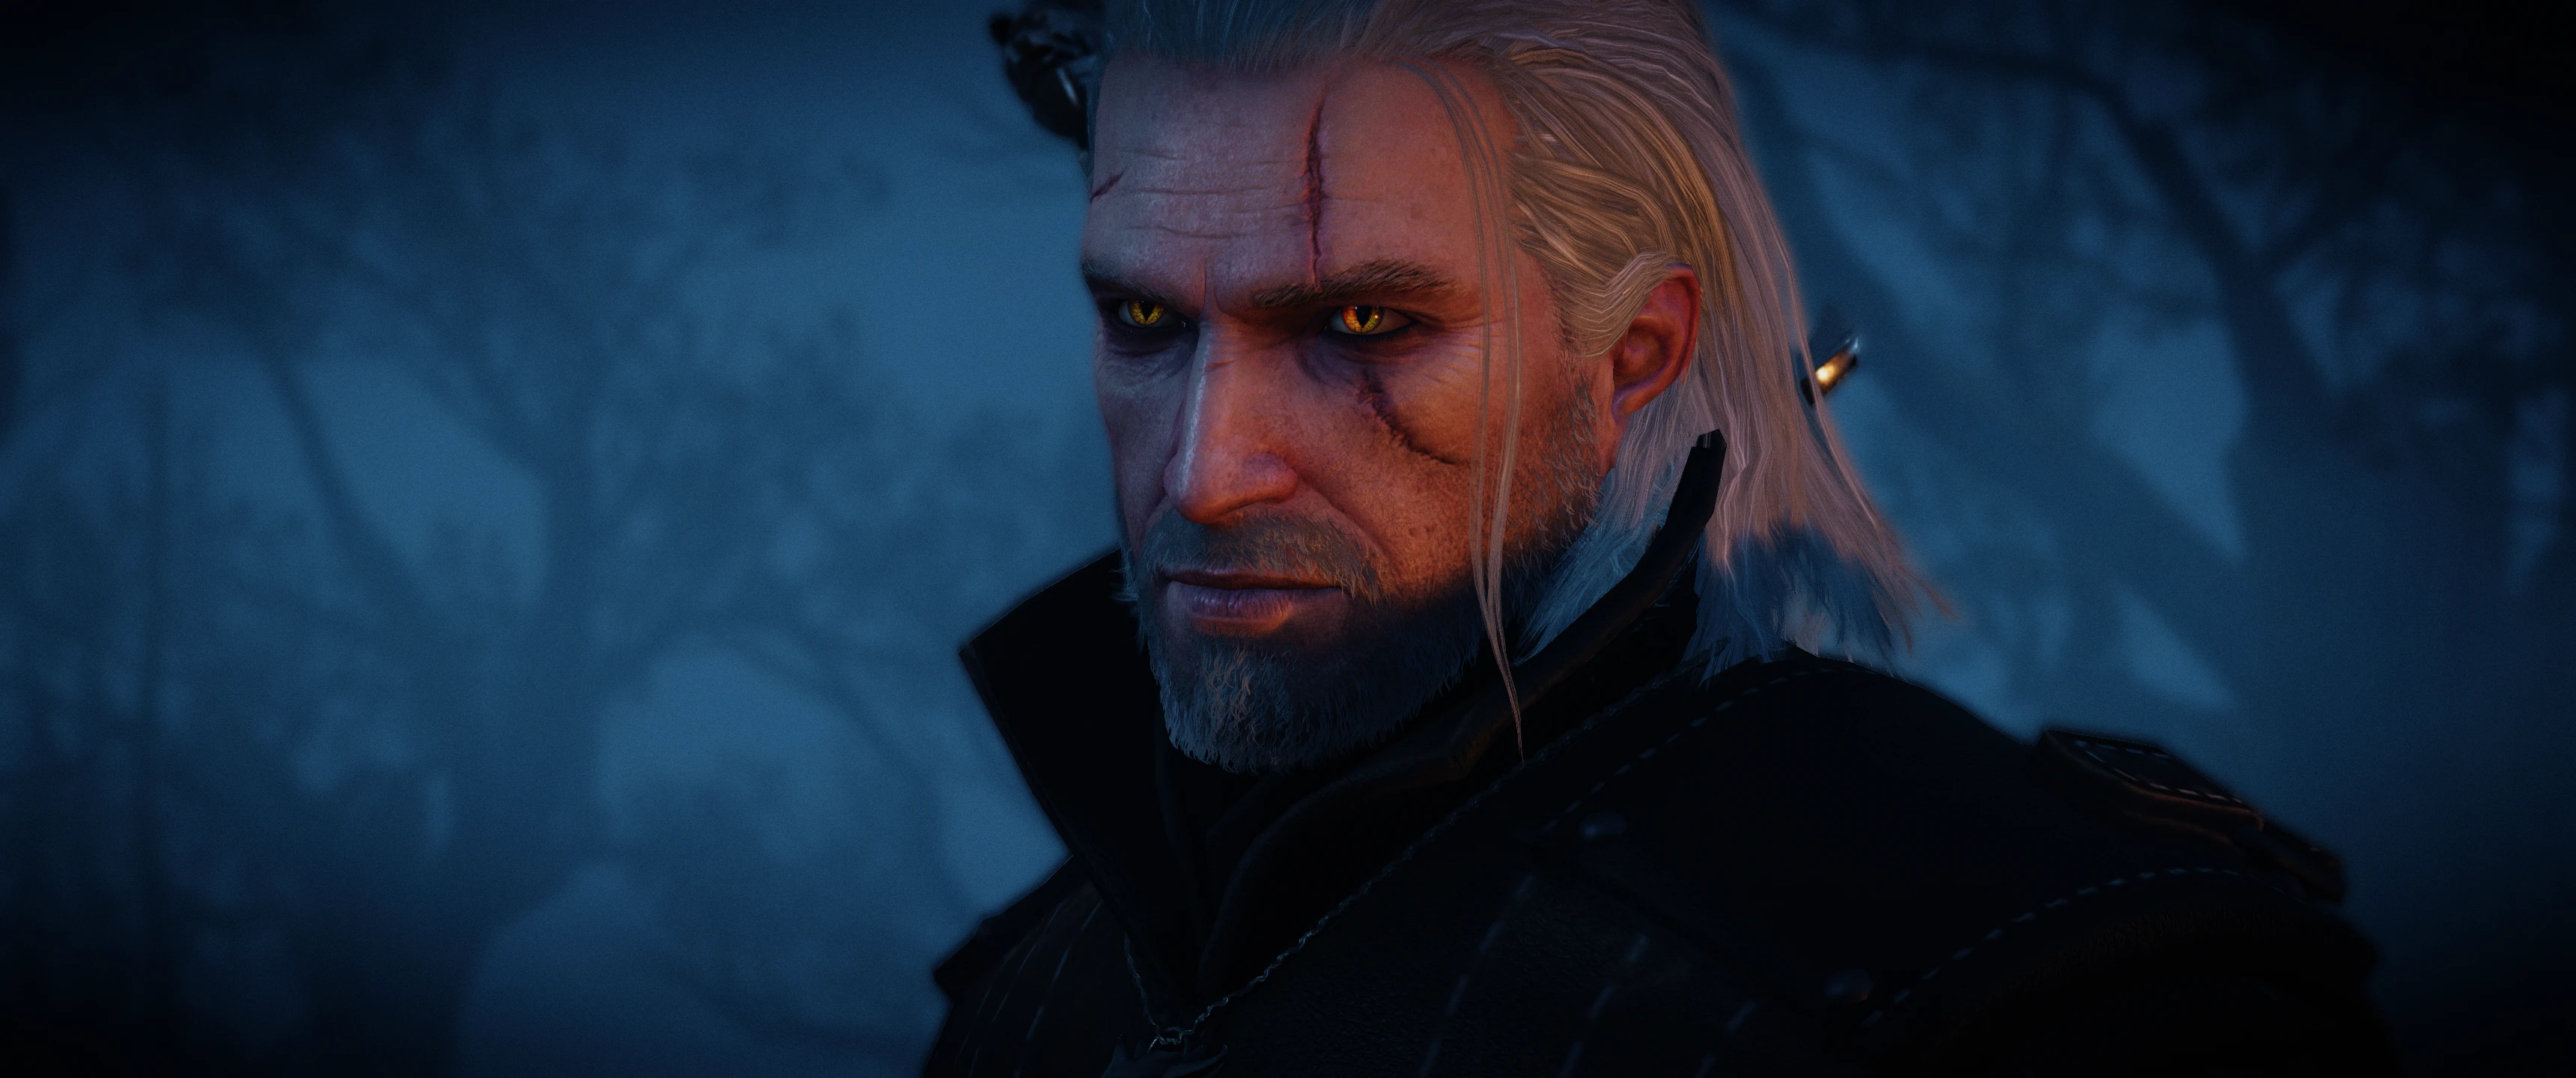 how to mod the witcher 3 using nexus mod manager